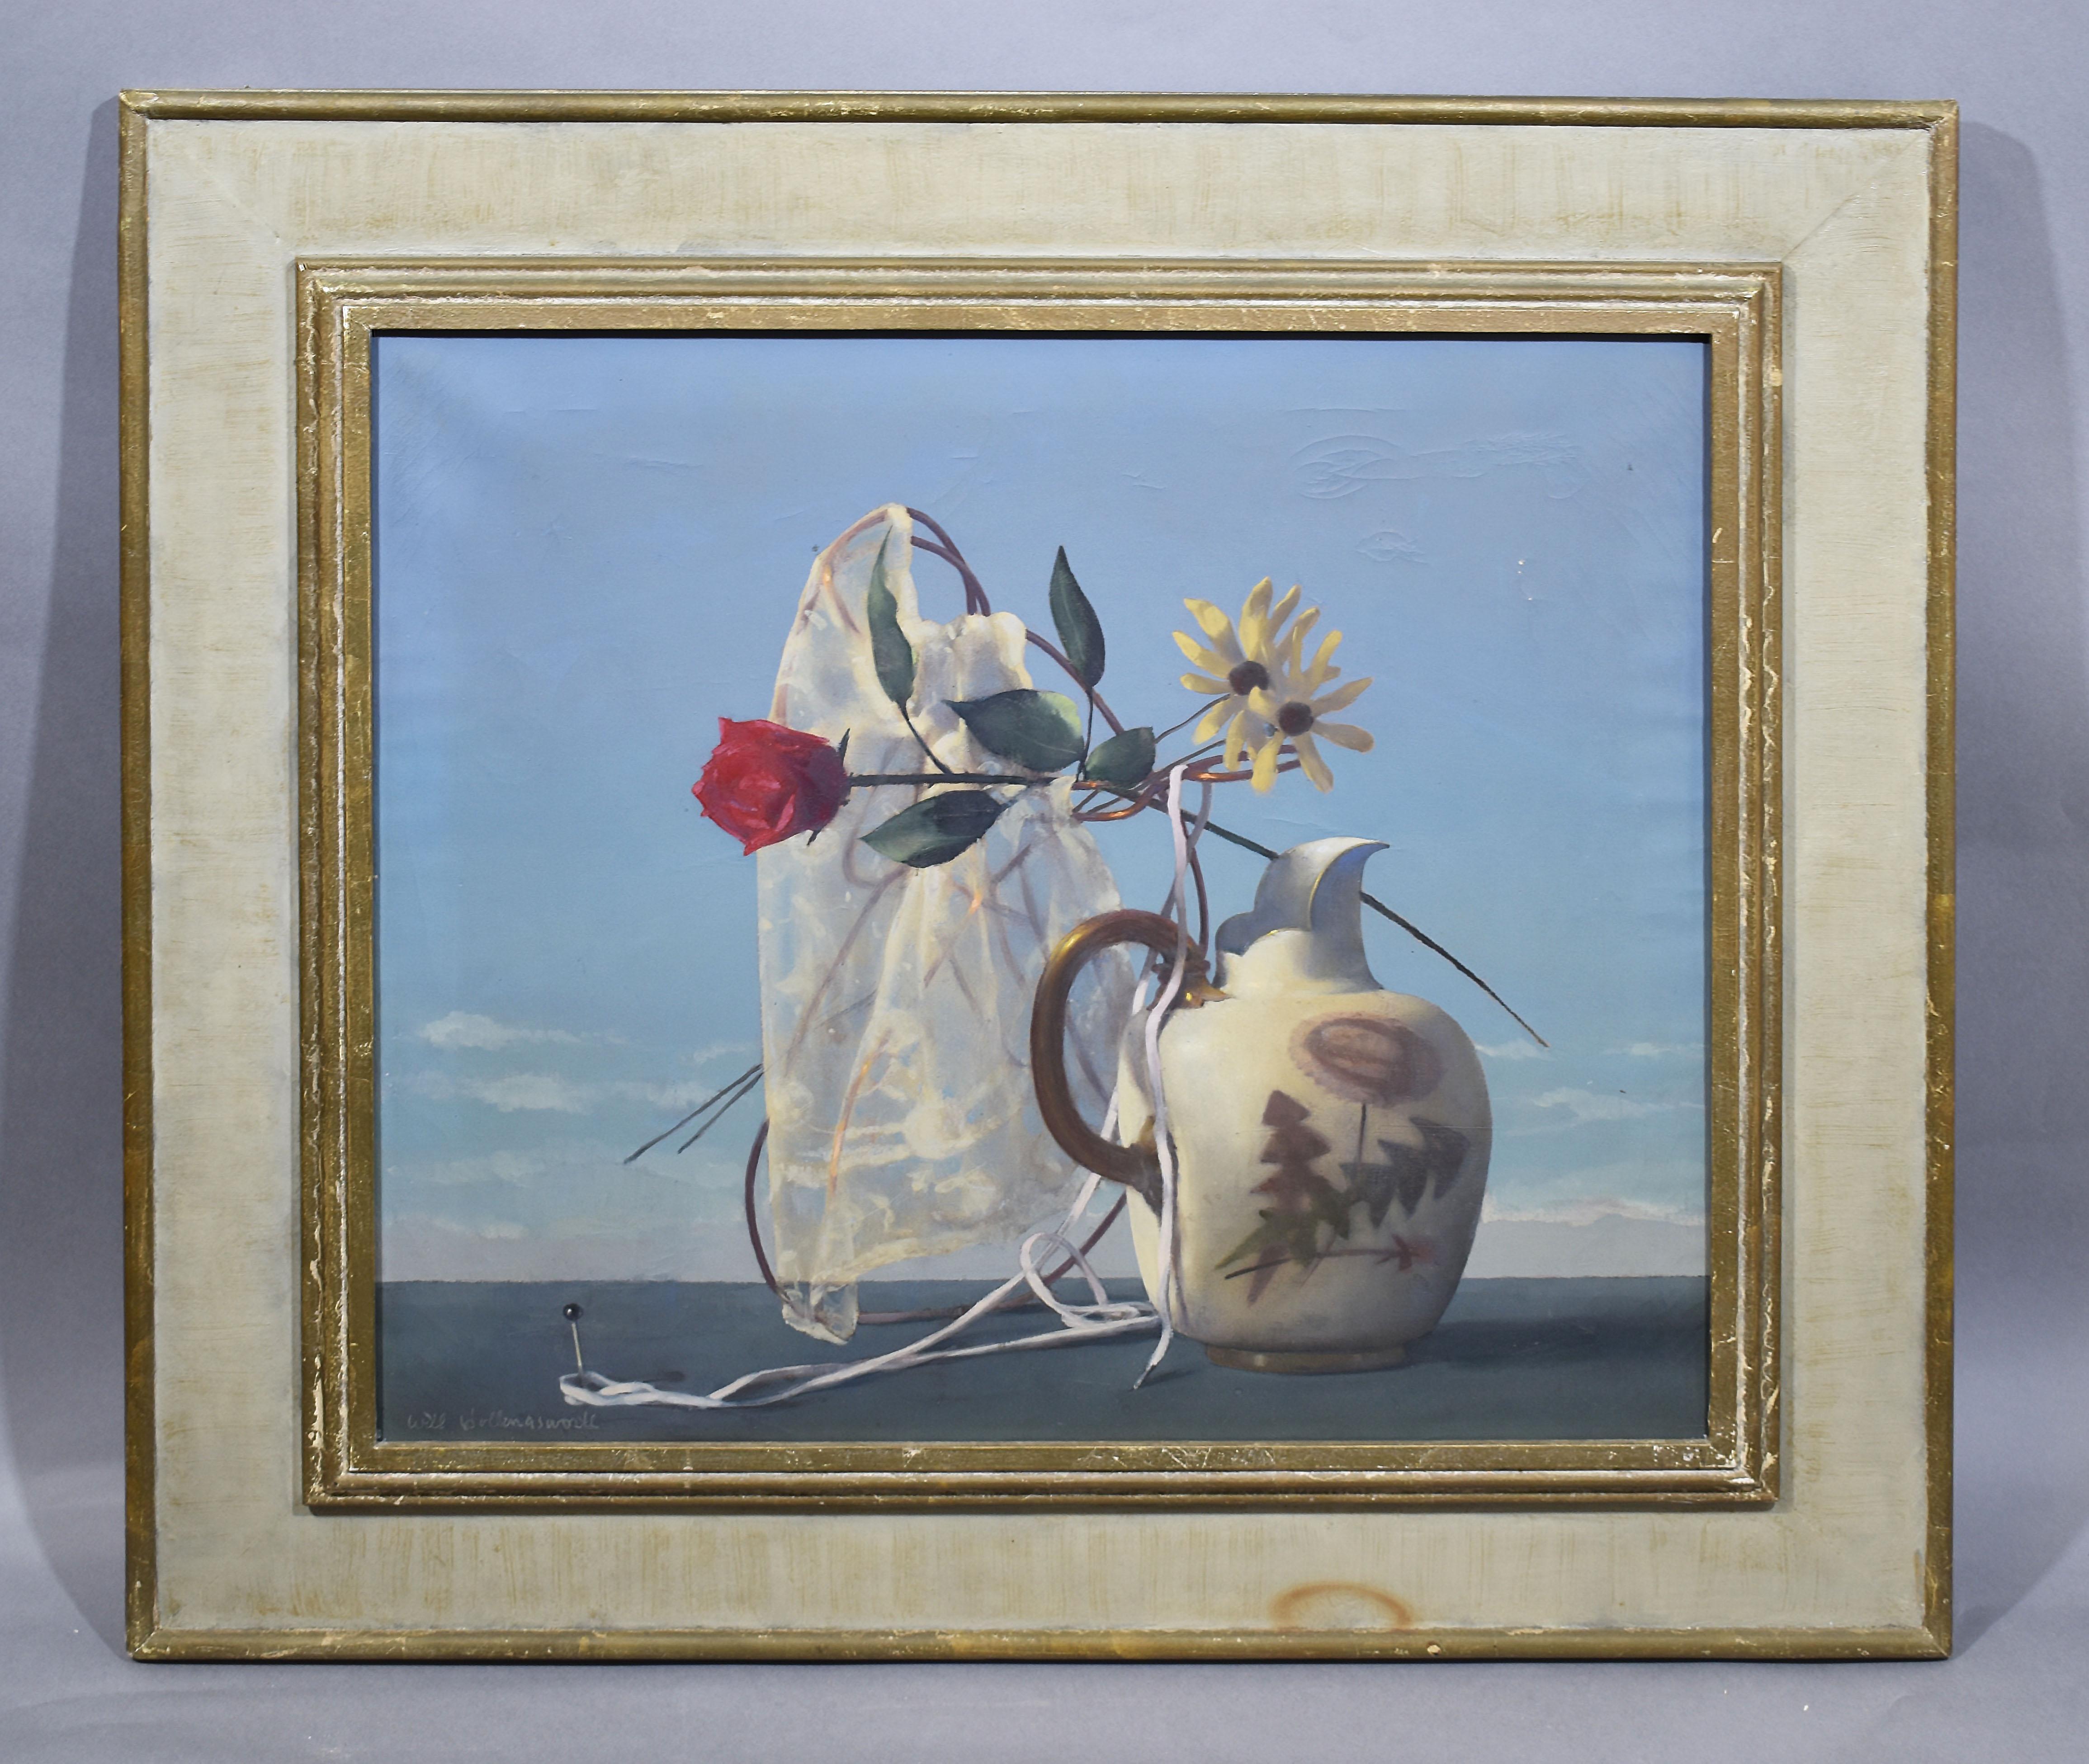 Antique American 1940s Surreal Landscape and Flower Still Life Oil Painting  (Grau), Still-Life Painting, von Will Hollingsworth